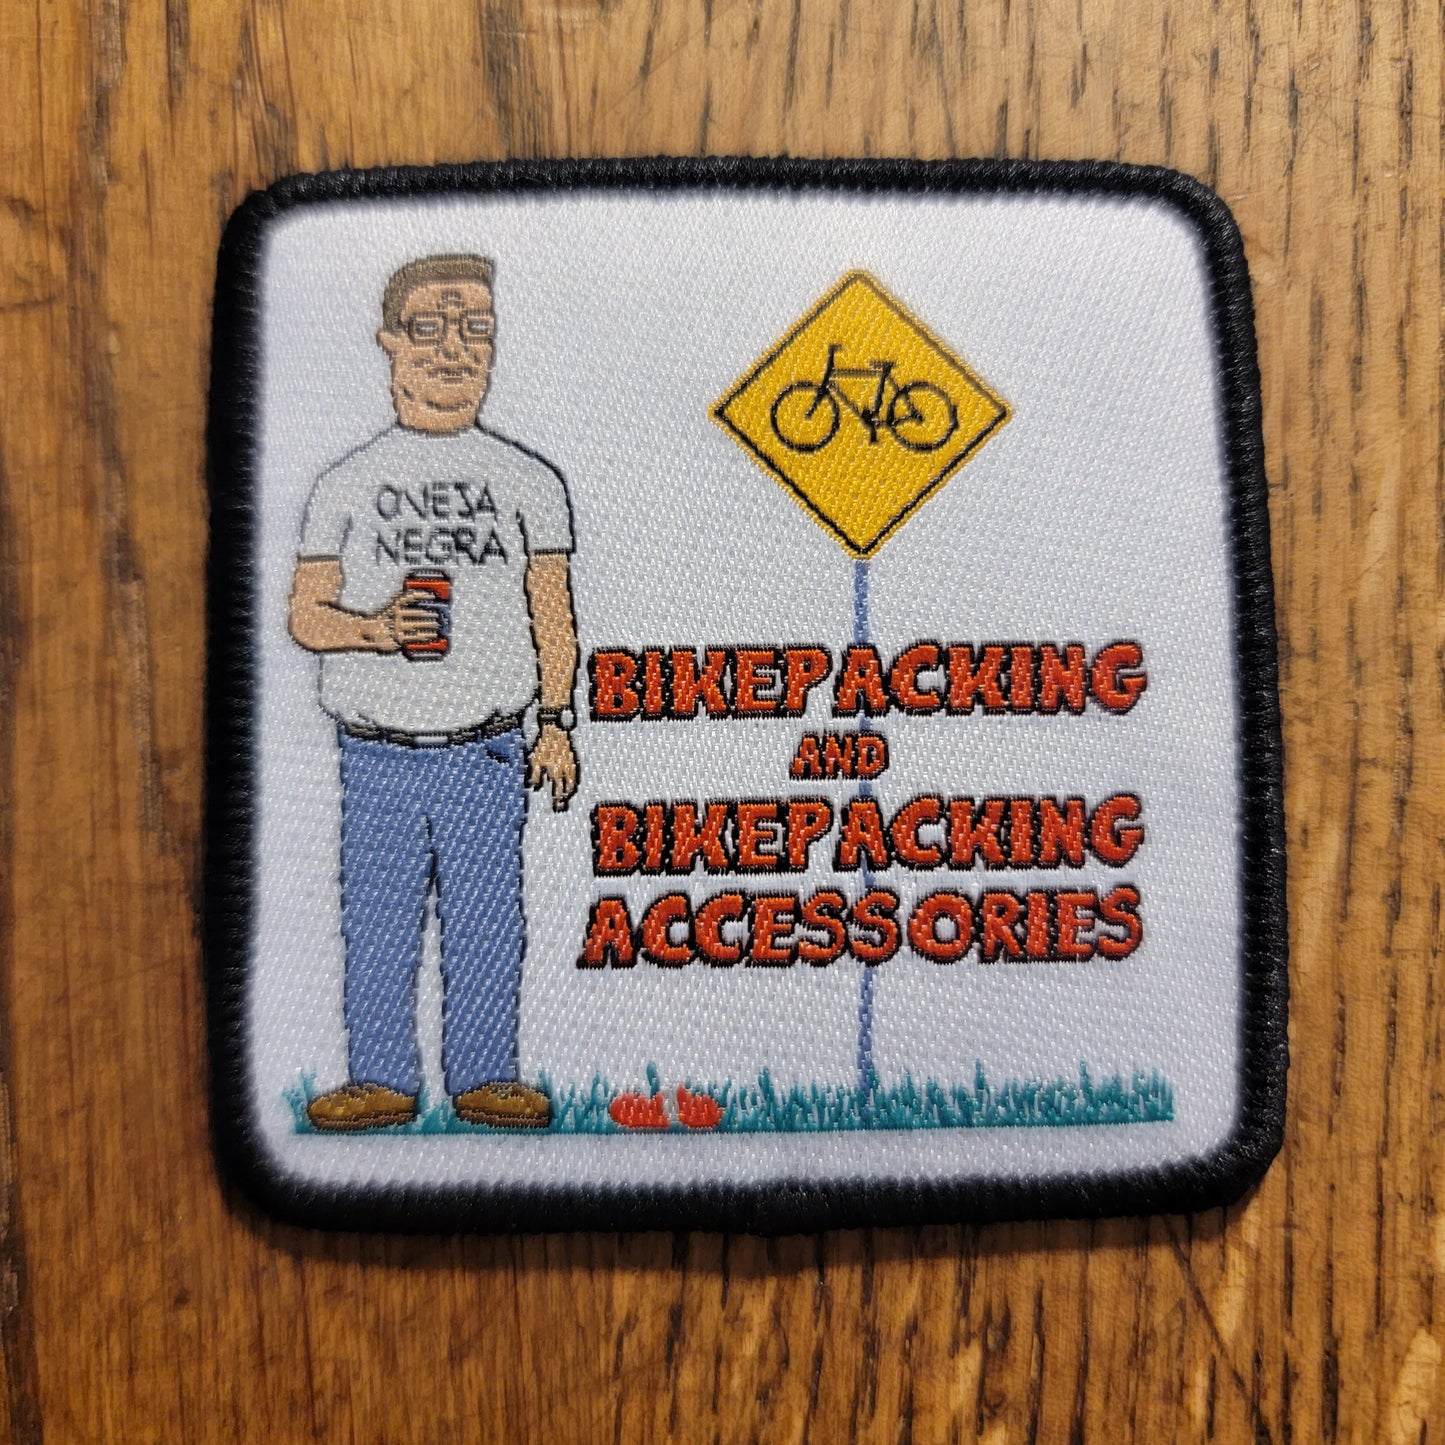 Oveja Negra Bikepacking and Bikepacking Accessories Patch